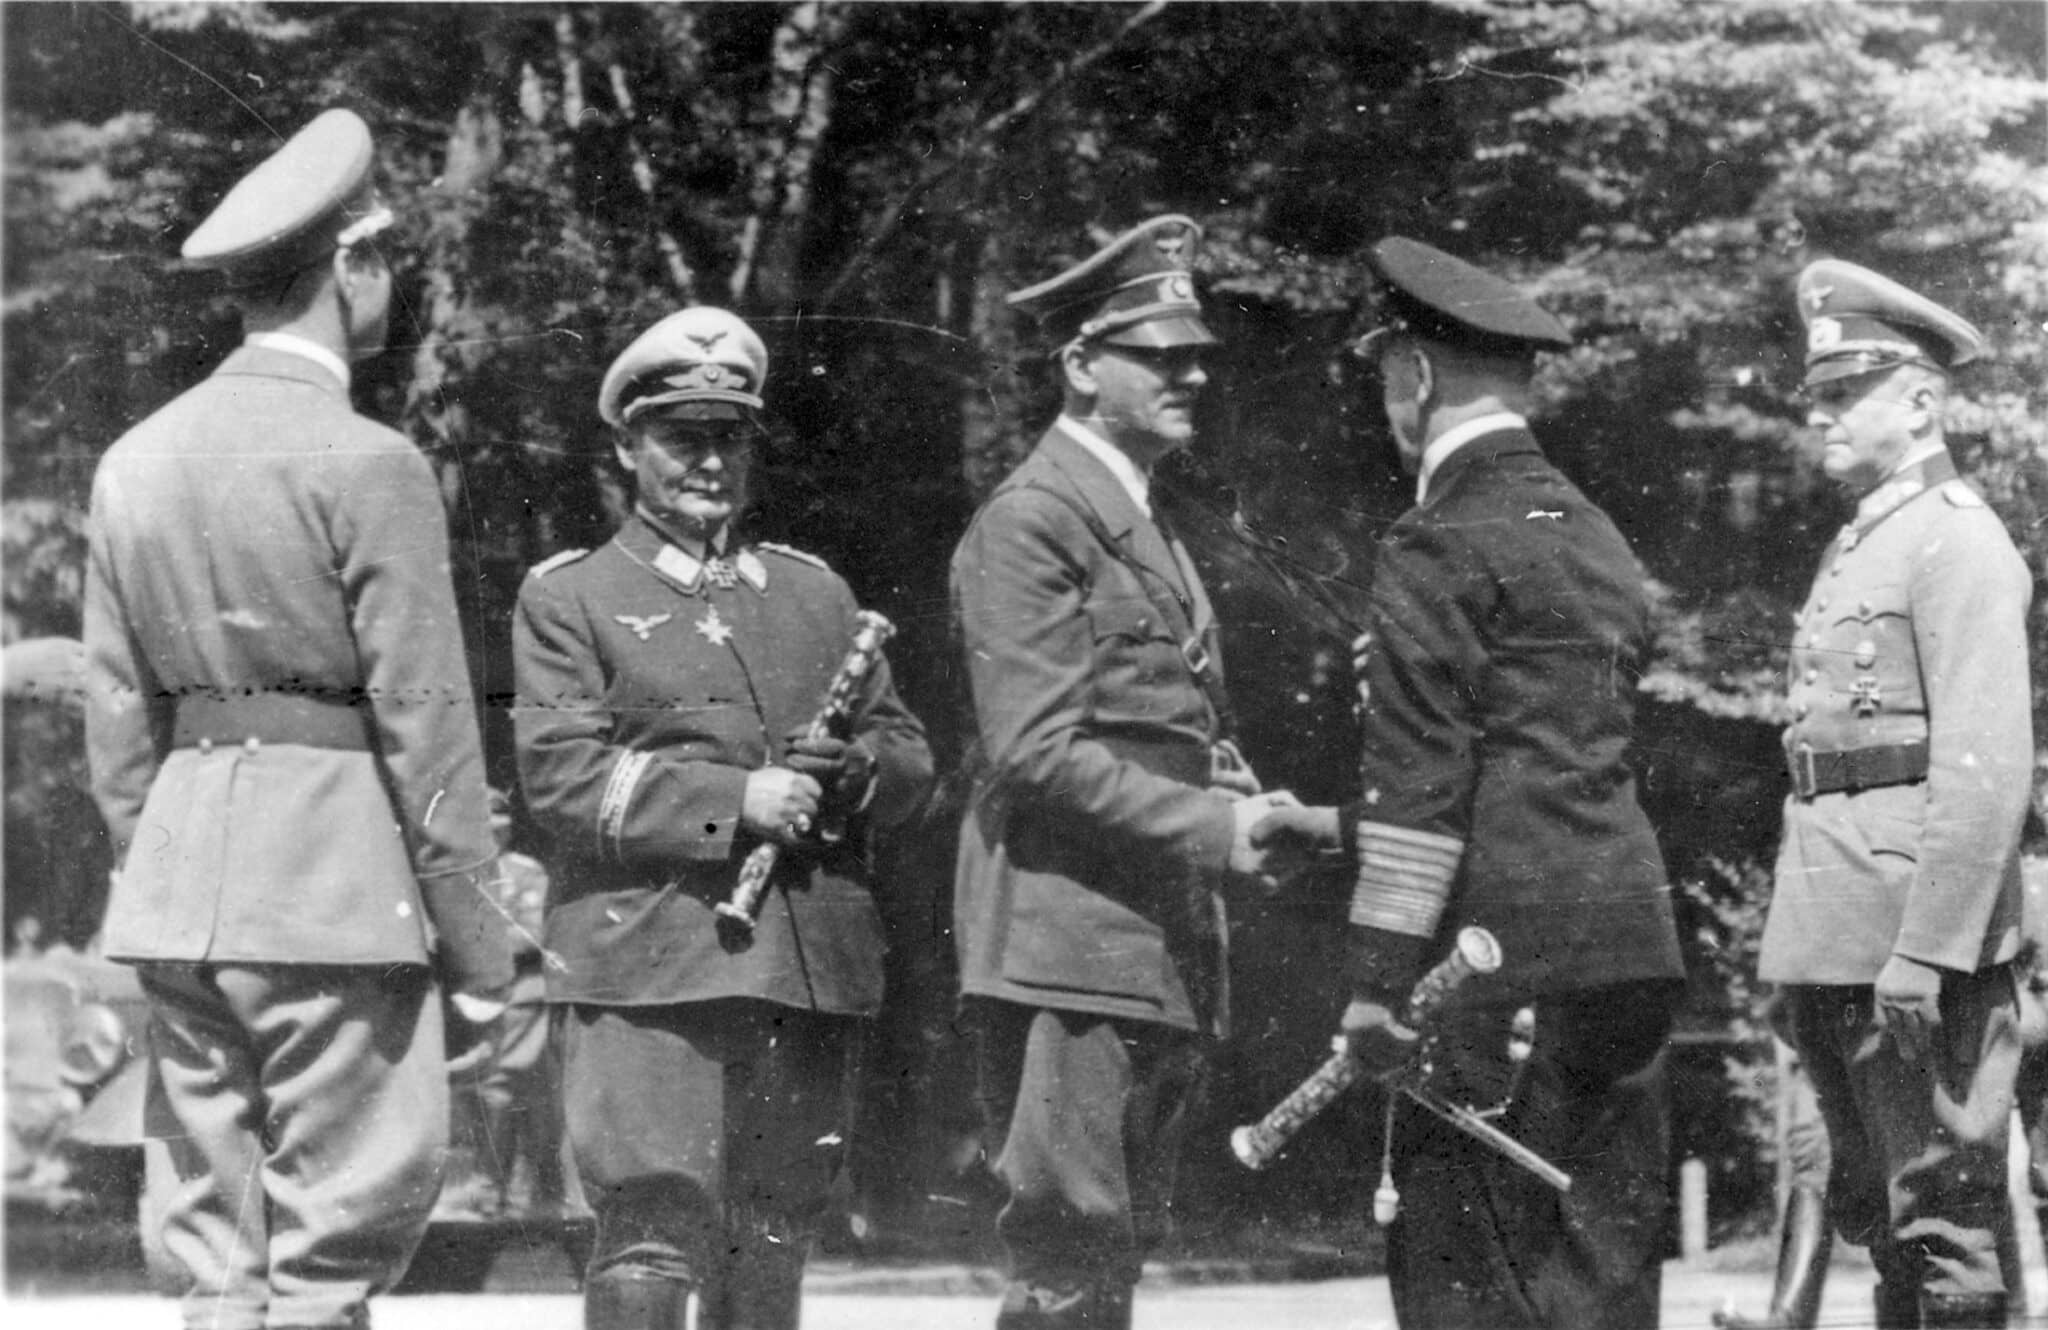 A historical photograph shows Adolf Hitler, center, greeting an officer in the French village of Compiegne June 22, 1940, after France surrendered to Nazi Germany. Germany's Catholic bishops marked the upcoming 75th anniversary of the end of World War II by issuing a statement criticizing the behavior of their predecessors under the Nazis. (CNS photo/Patrick Kovacs, Reuters)